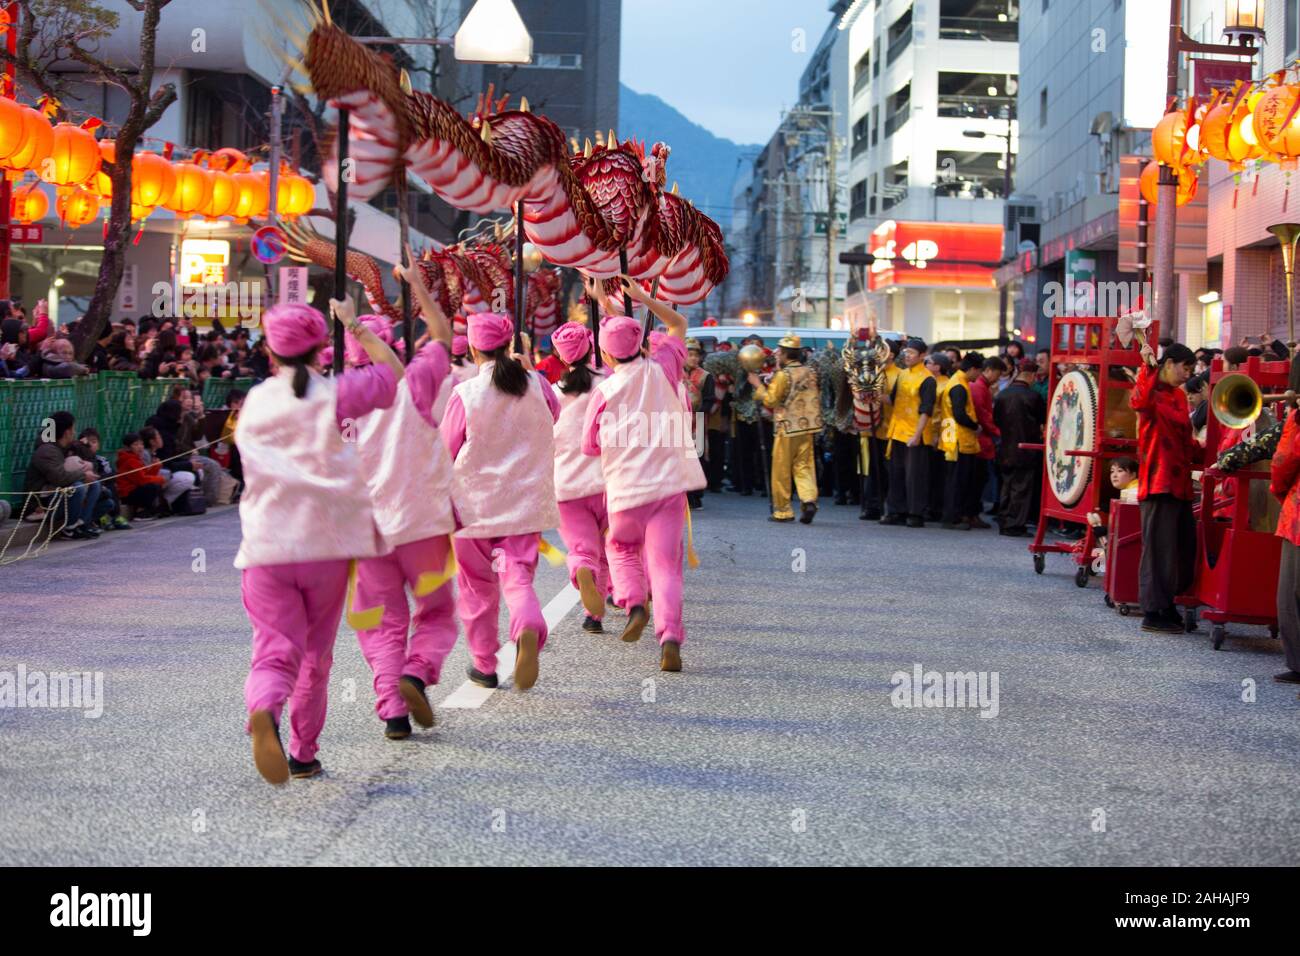 This is a picture of a group performing a dragon dance in the street during lantern festival in Nagasaki Japan. Stock Photo